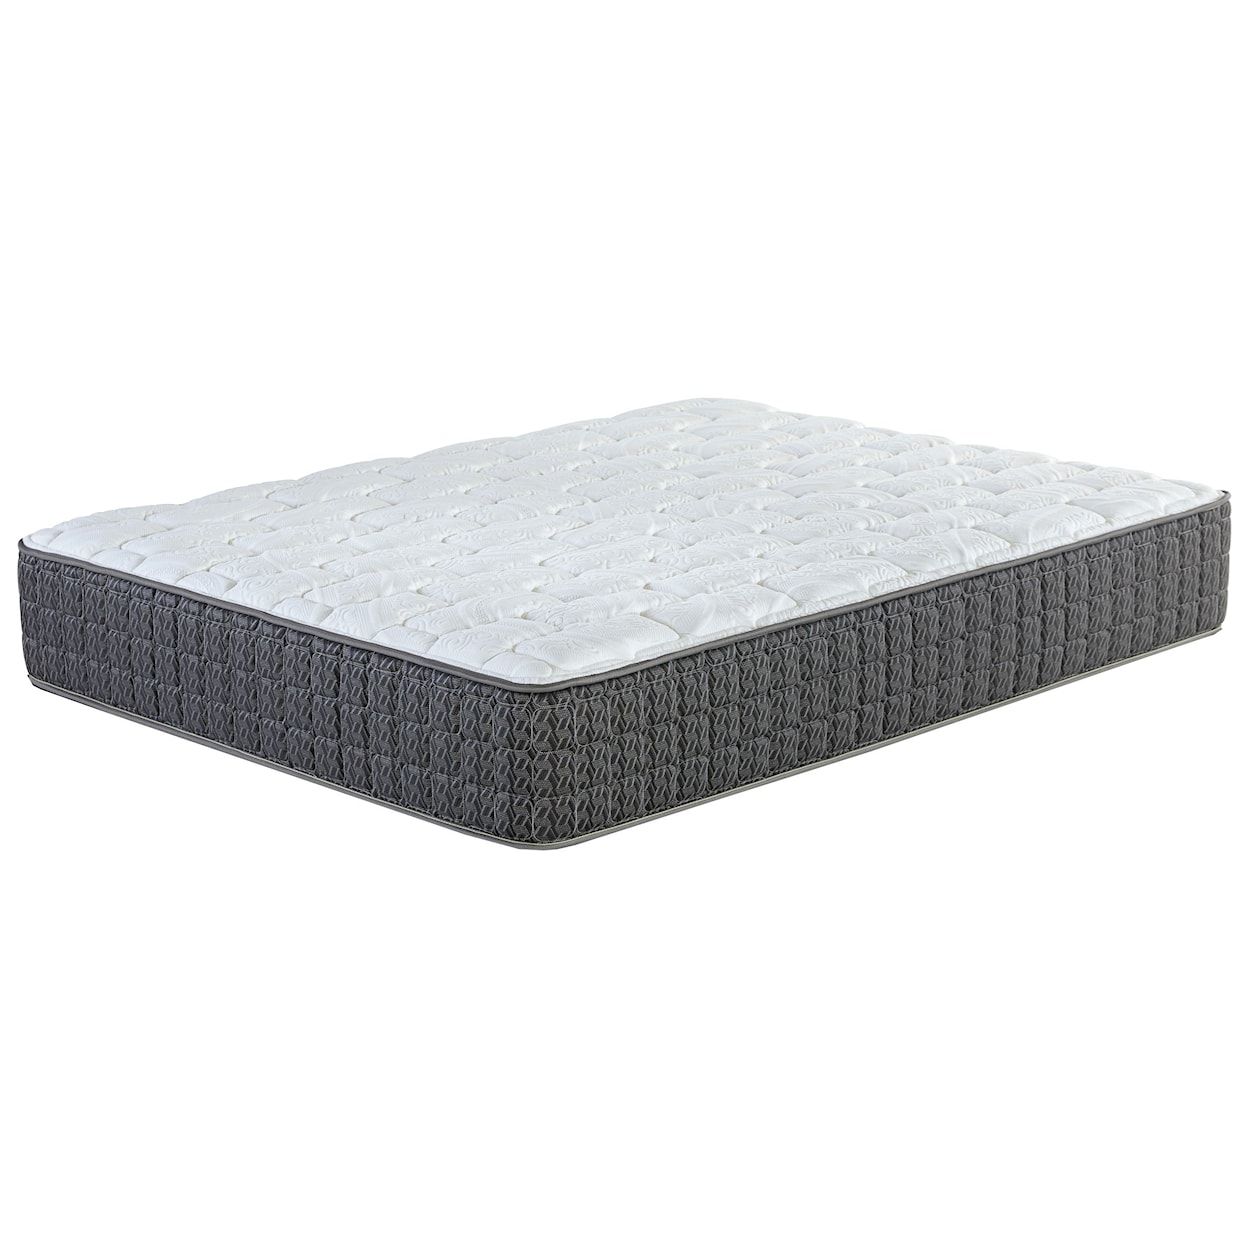 Corsicana Kinley Firm Cal King Firm Pocketed Coil Mattress